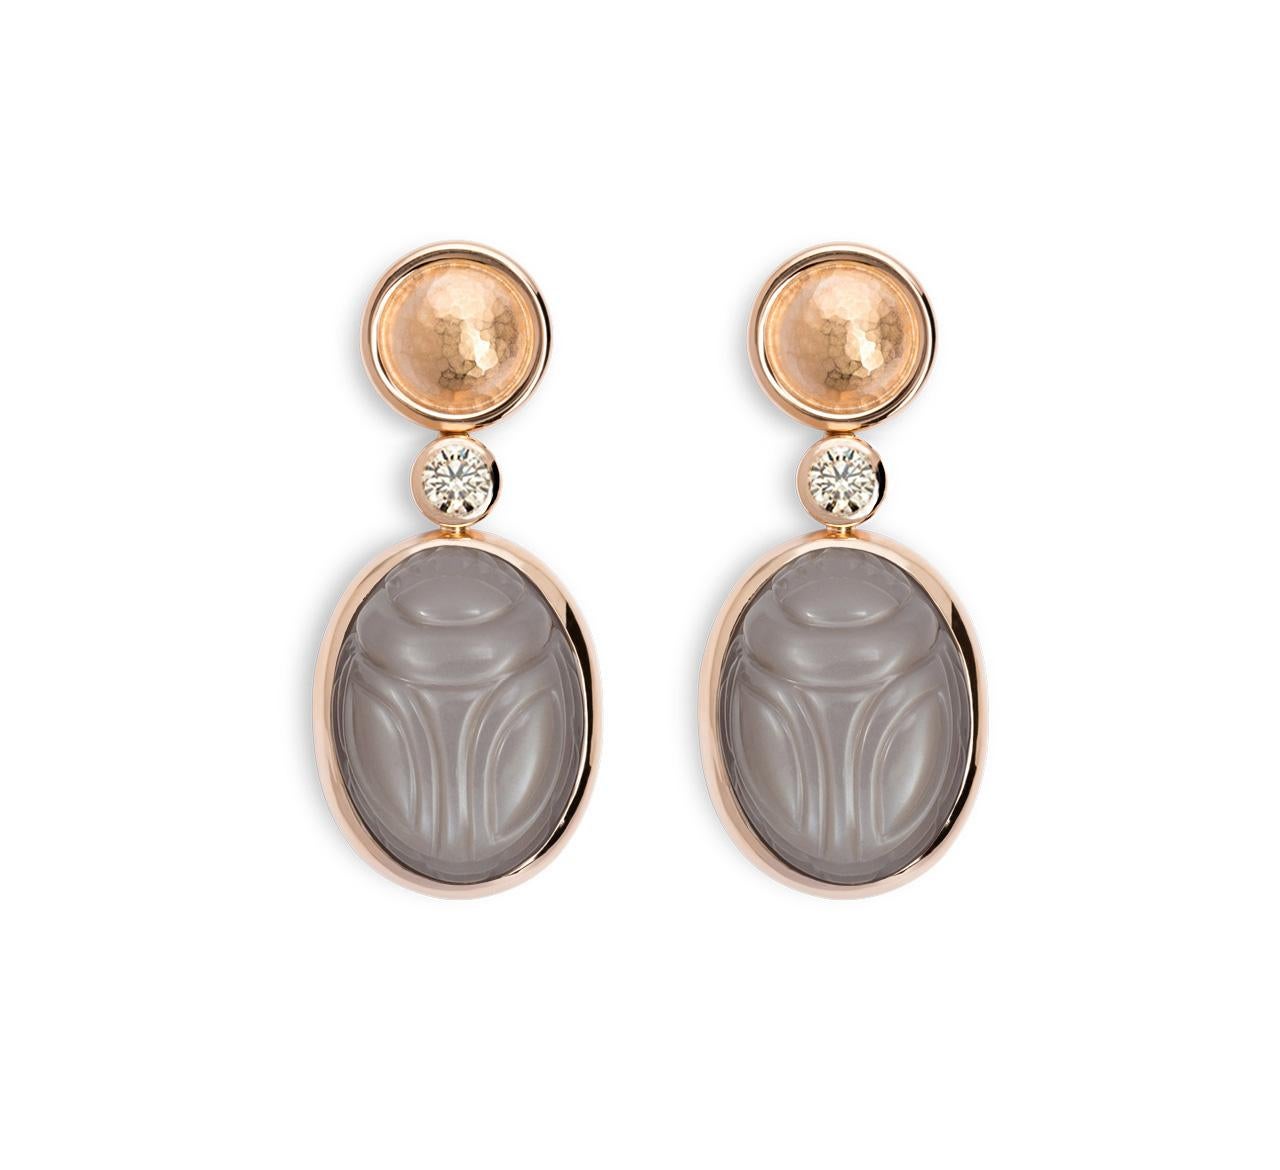 A pair of rose gold dangle earrings with two moonstone scarabs 36,41 ct and two light-brown brilliant-cut diamonds 0.53 ct. Just beautiful.
Designed by Colleen B. Rosenblat